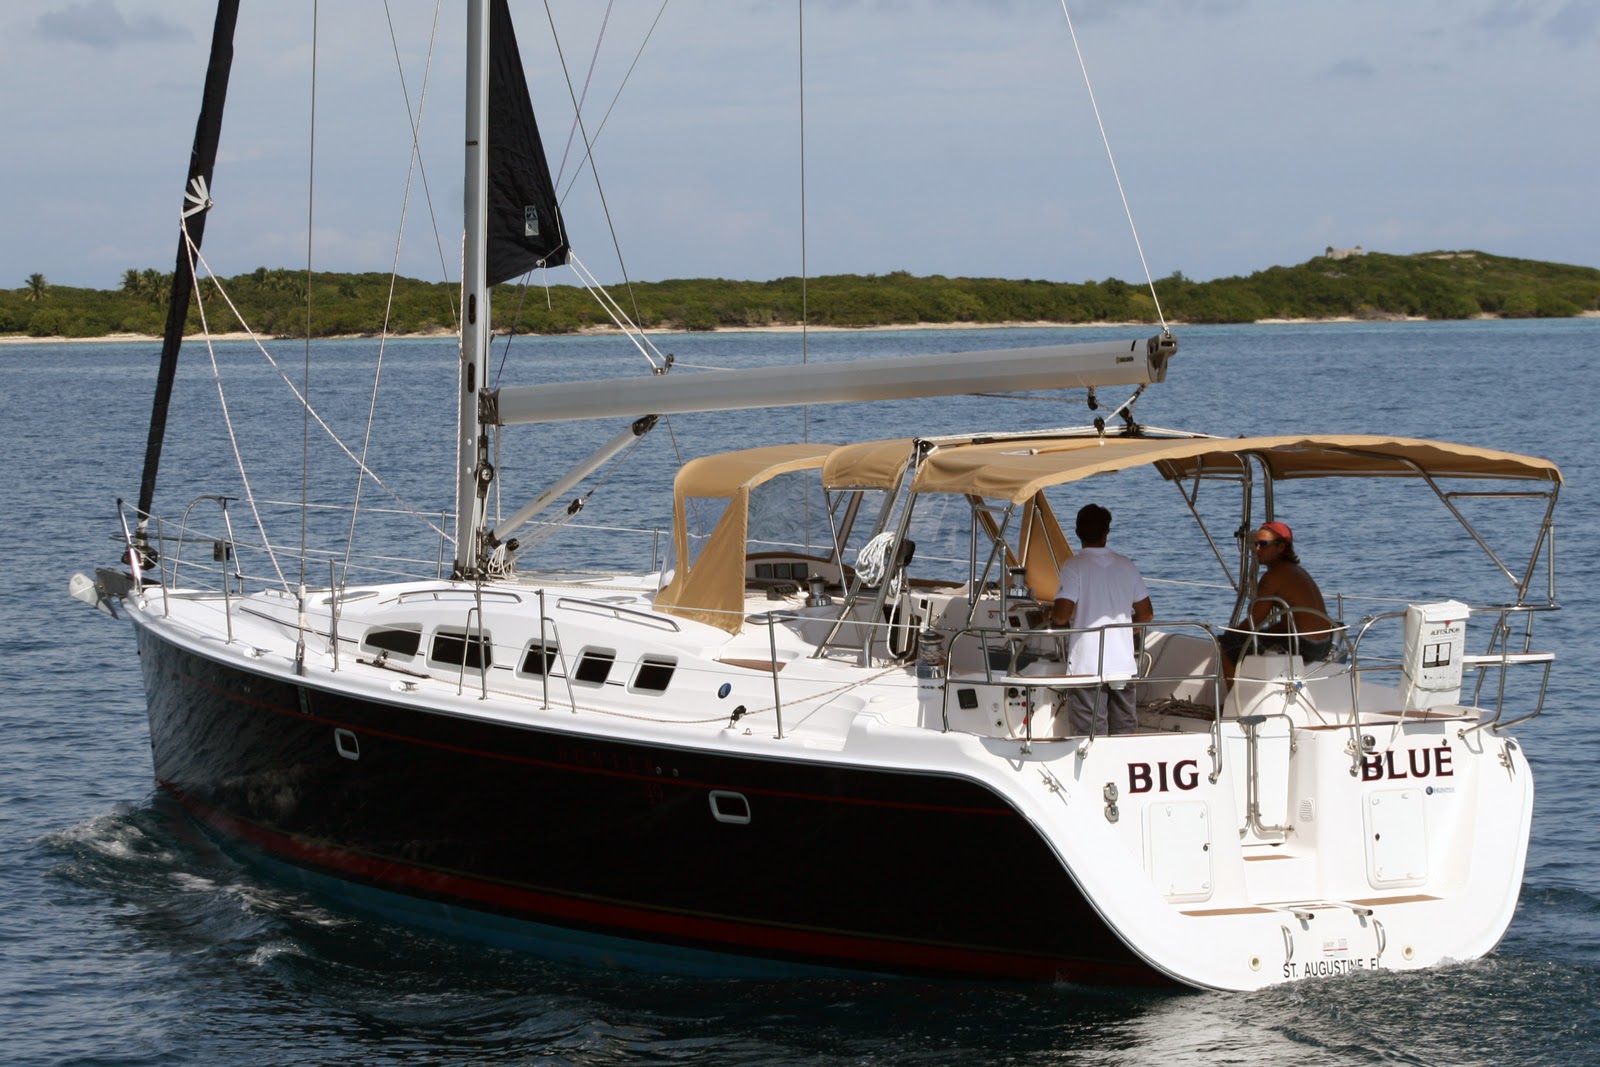  : Hunter Sailboats for Sale Boat and Business Purchase for Charter